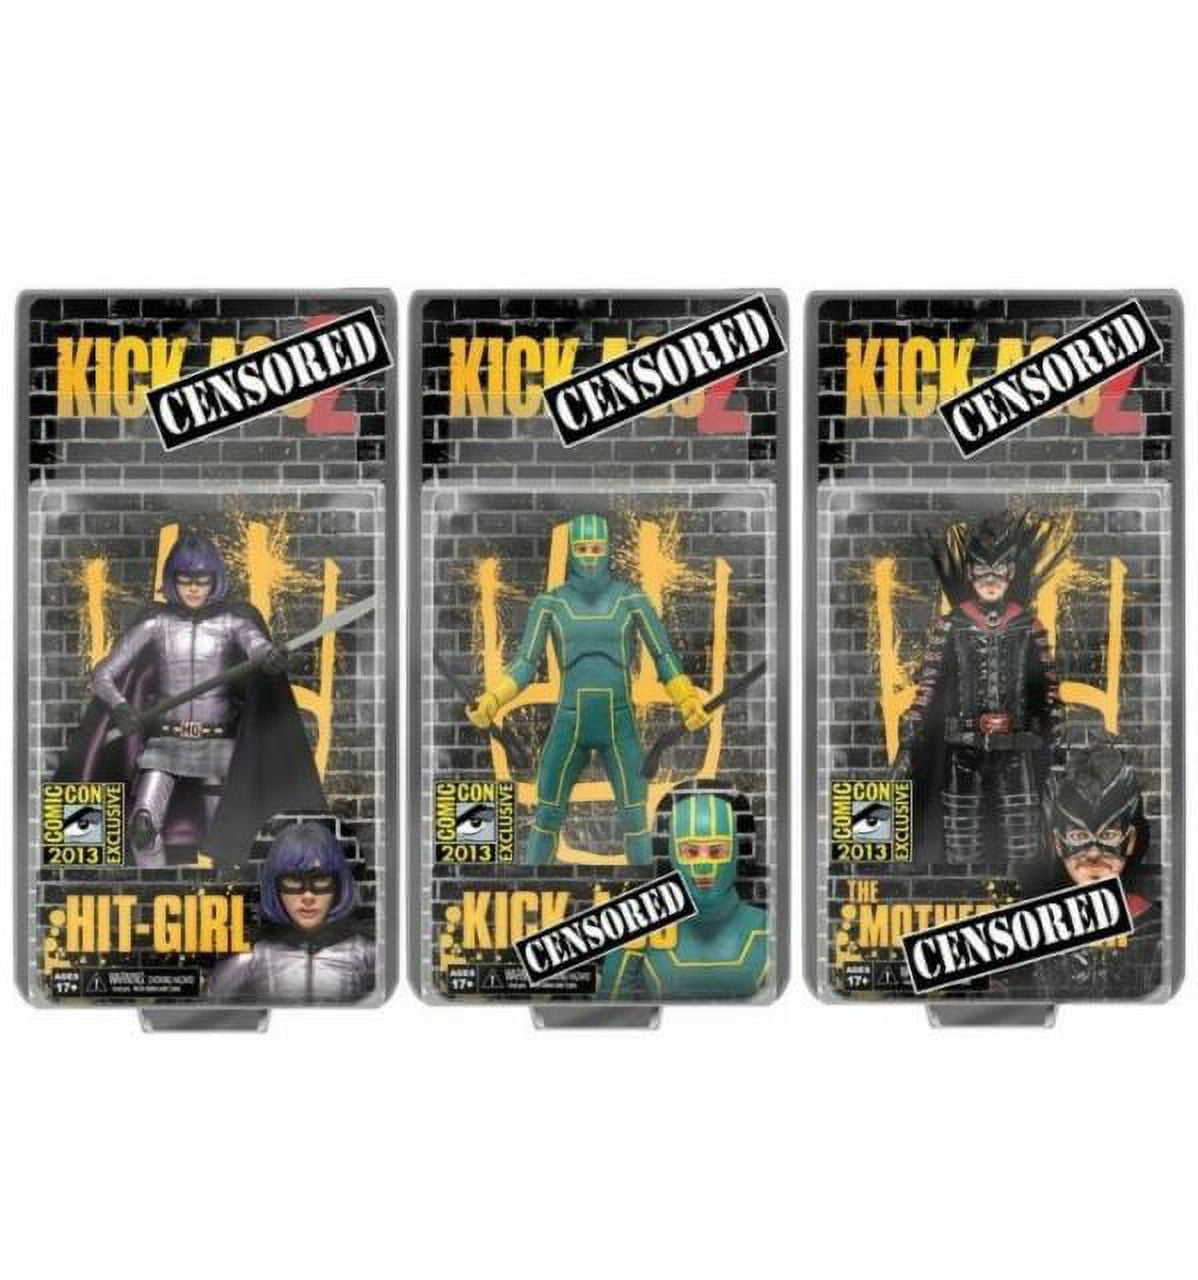 Neca Reel Toys Kick-Ass2 Series 1 Uncensored Action Figures Comic Con 2013  